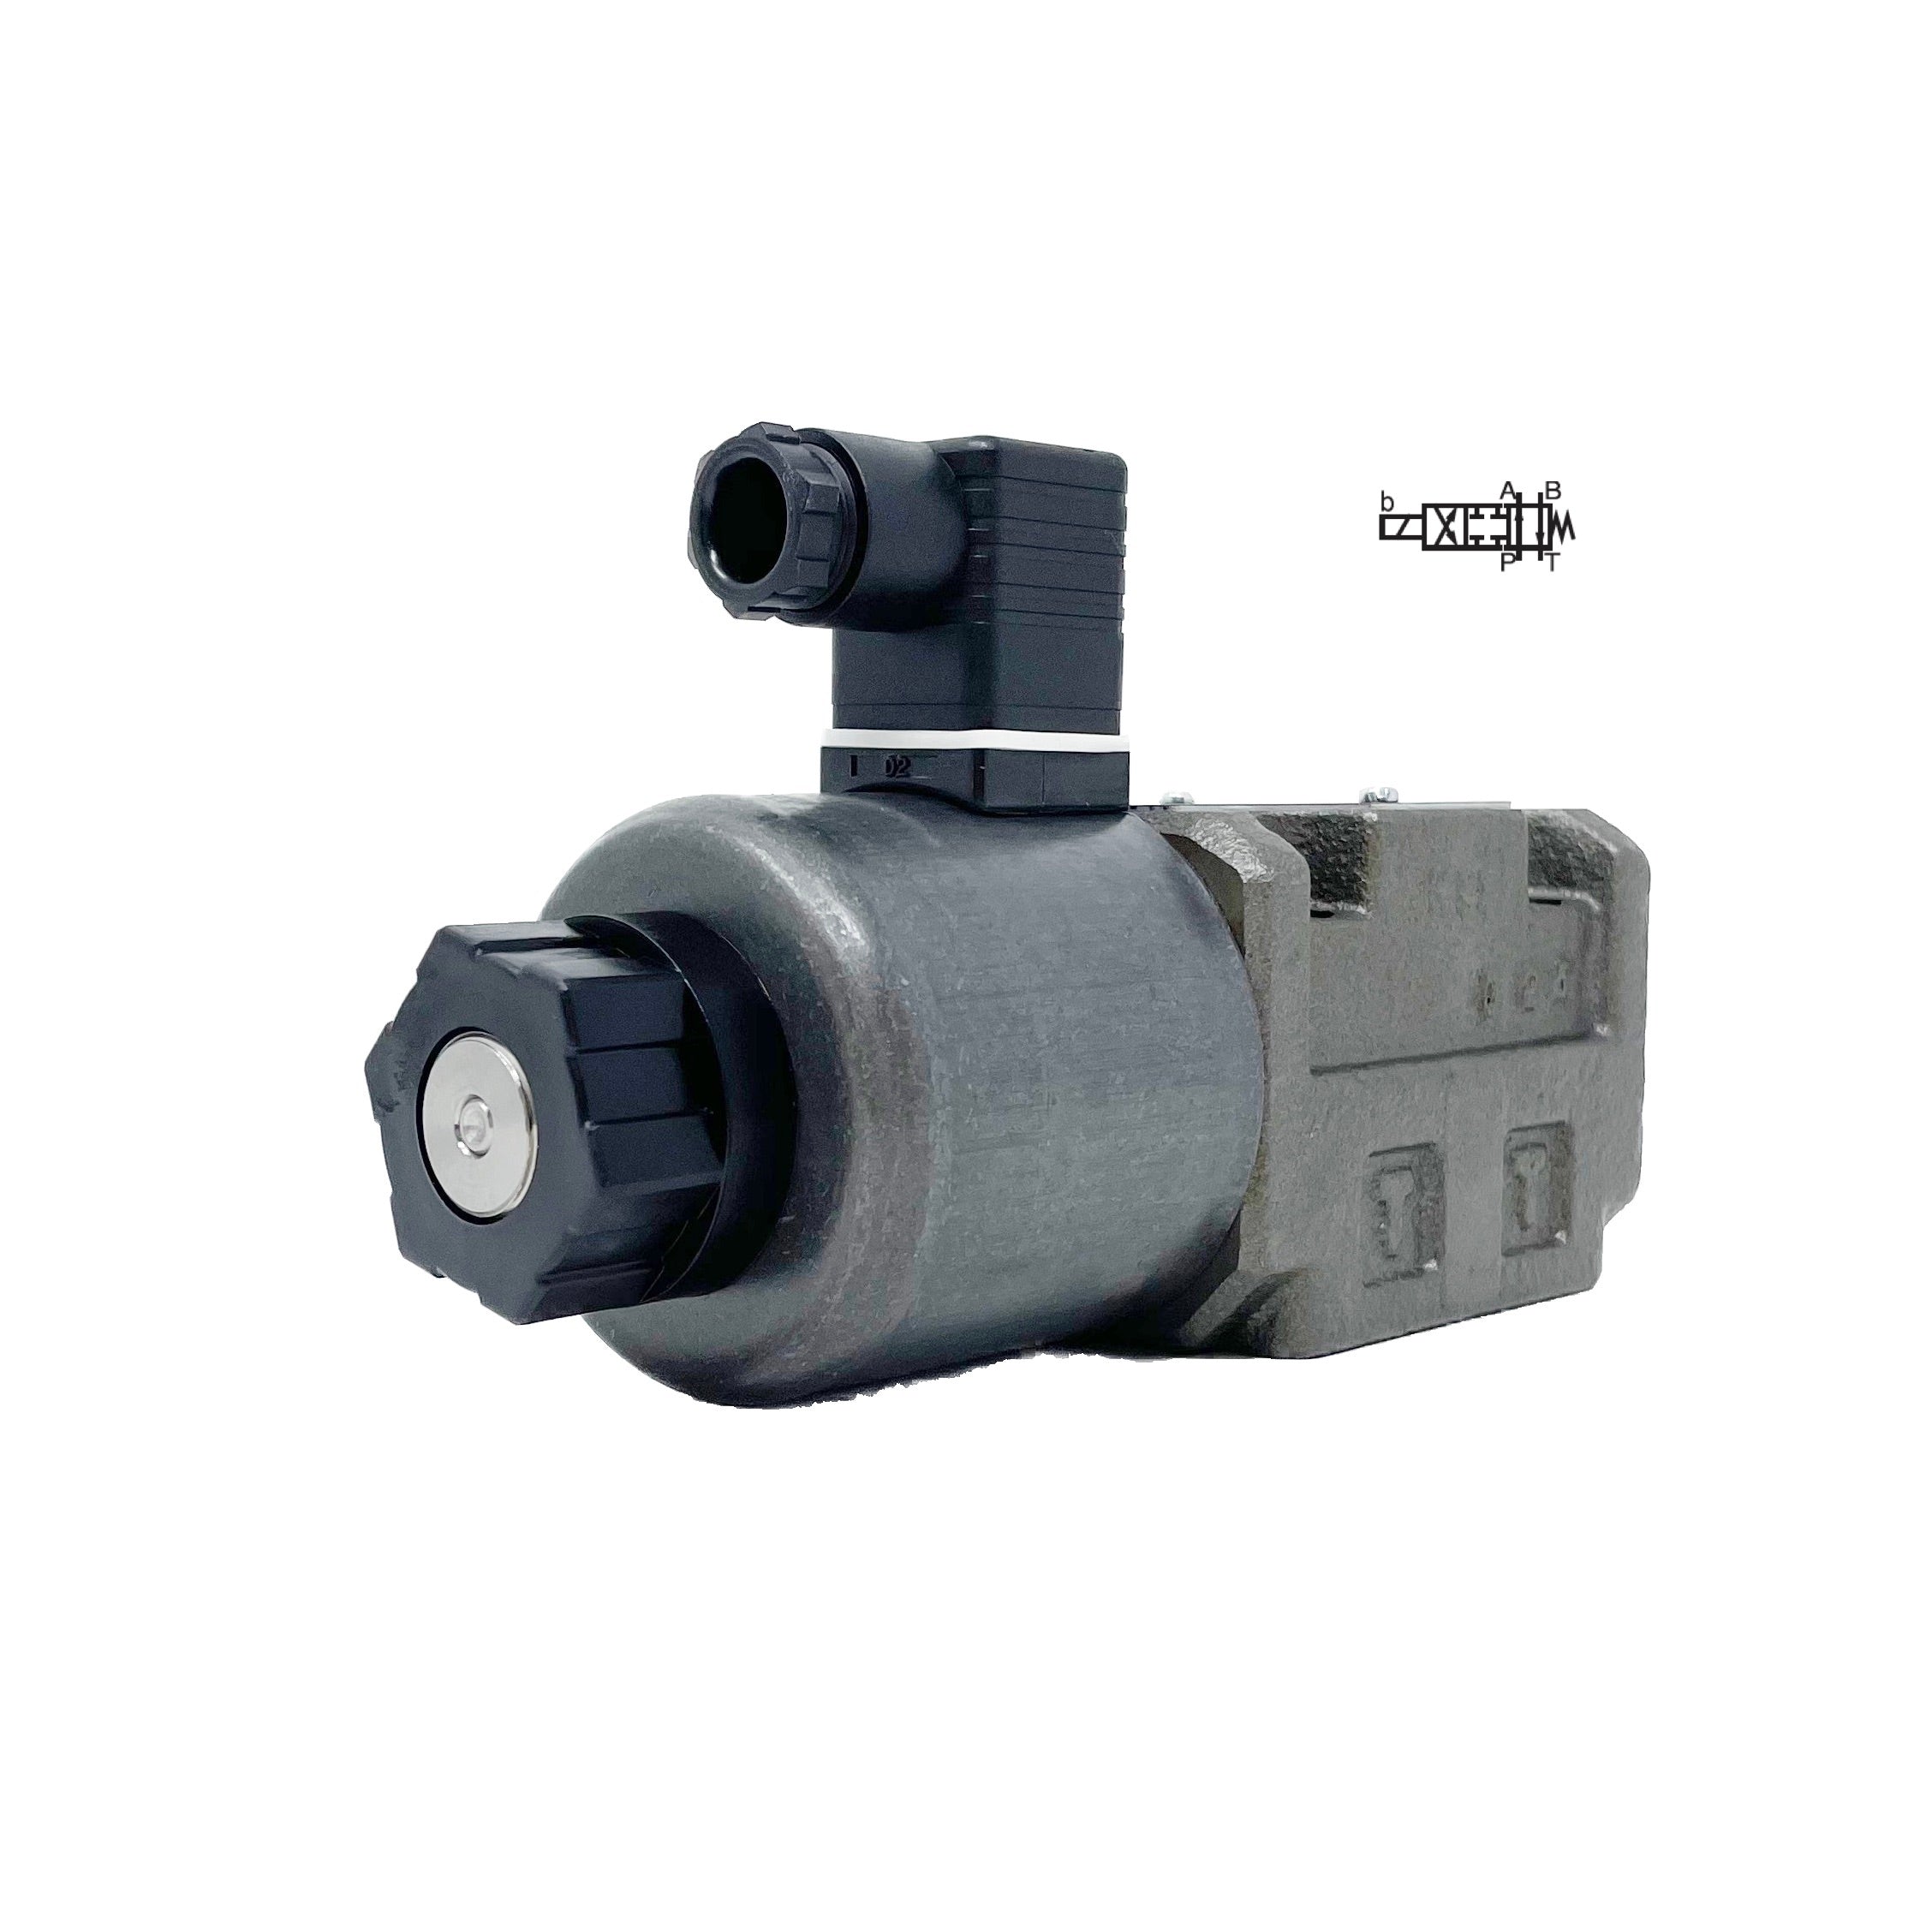 SA-G03-A3X-C115-E21 : Nachi Solenoid Valve, 3P4W, D05 (NG10), 34.3GPM, 5075psi, P to A, B to T in Neutral, 110 VAC, DIN